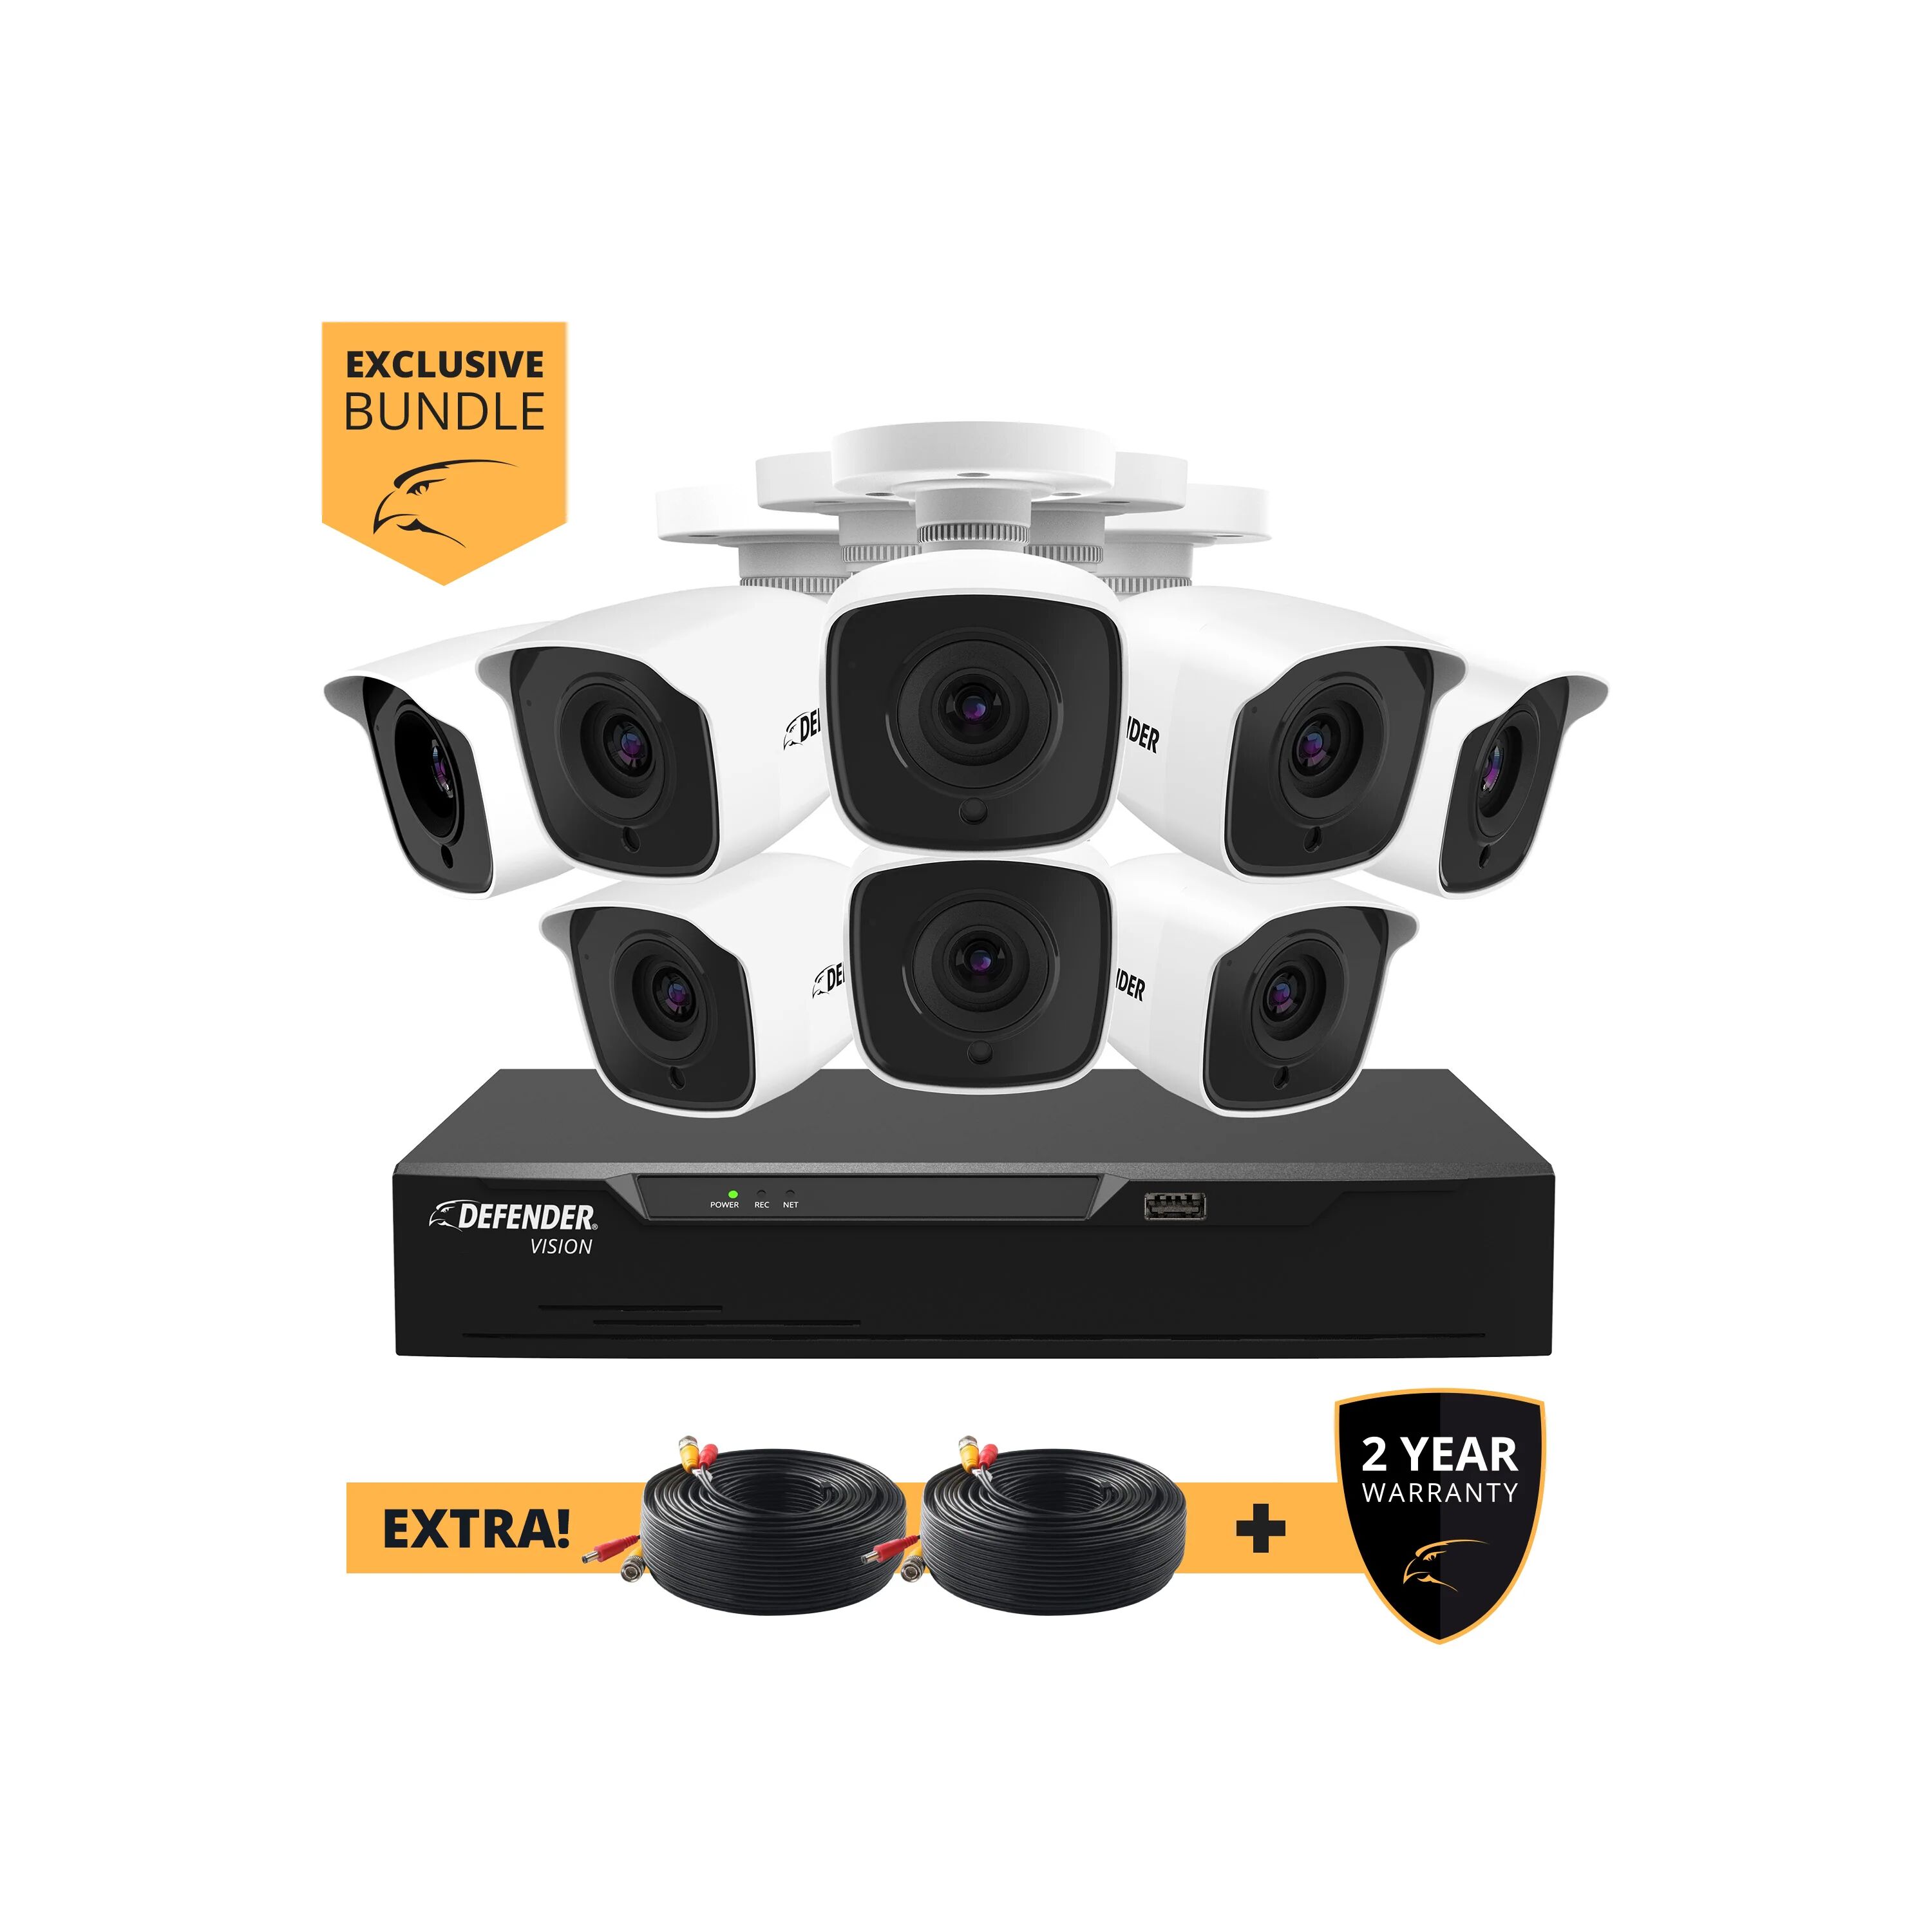 Defender Cameras Exclusive Bundle: Vision 4K Ultra HD Wired 8 Channel Security System / 8 Cameras